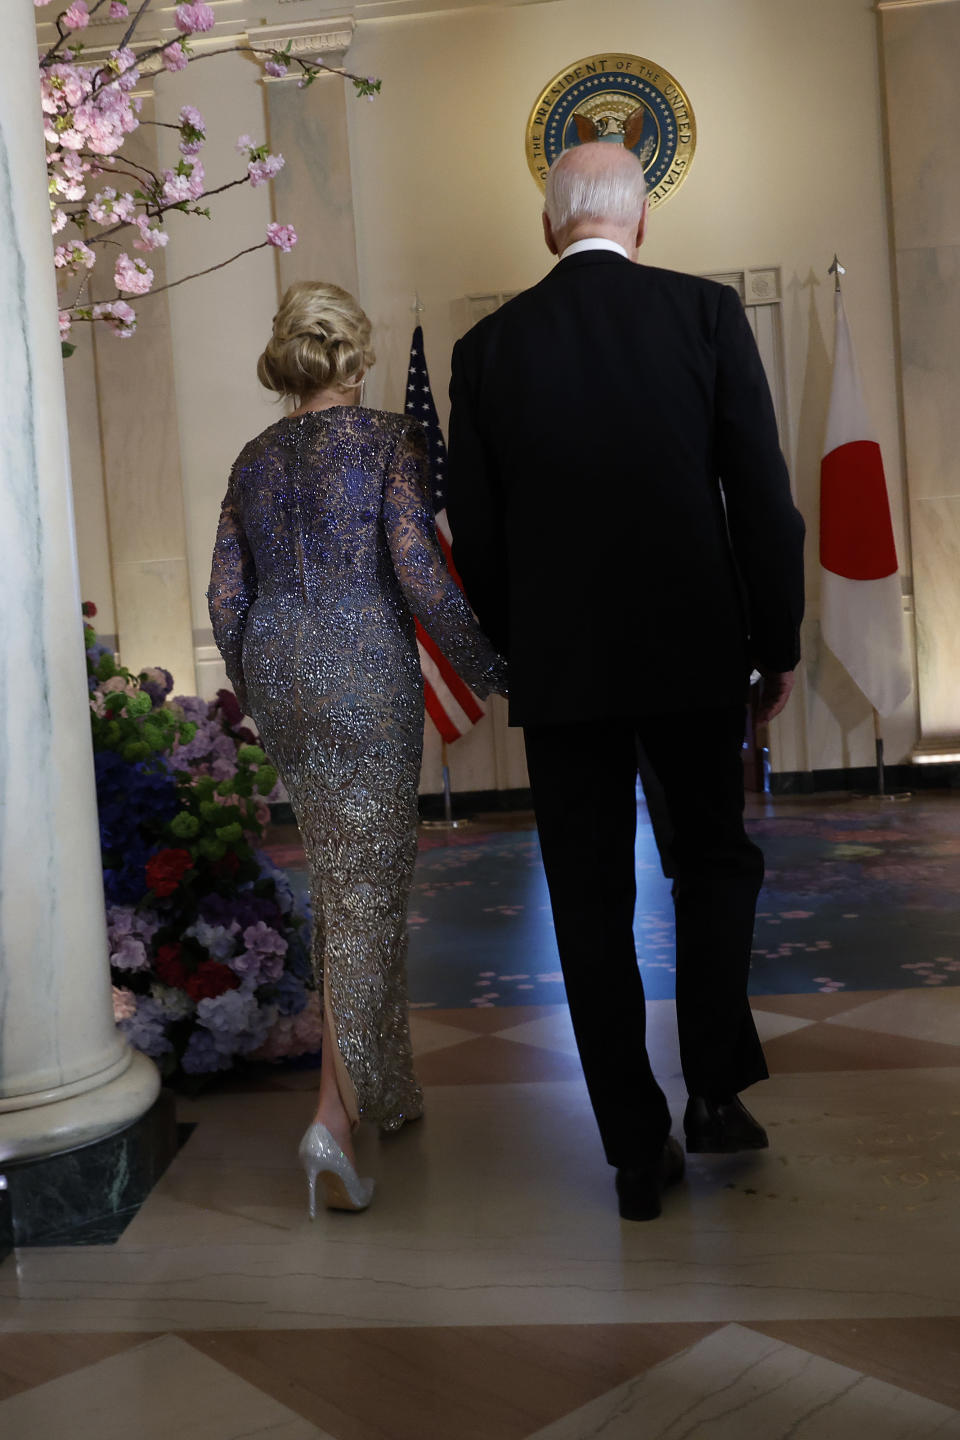 WASHINGTON, DC - APRIL 10: U.S. President Joe Biden and first lady Jill Biden head into the Blue Room while hosting Japanese Prime Minister Fumio Kishida for a state dinner in the East Room of the White House on April 10, 2024 in Washington, DC. Biden welcomed Kishida for an official state visit where the two leaders announced new agreements on technology and strengthening military and economic partnerships against Chinese aggression in the Indo-Pacific region. (Photo by Chip Somodevilla/Getty Images)